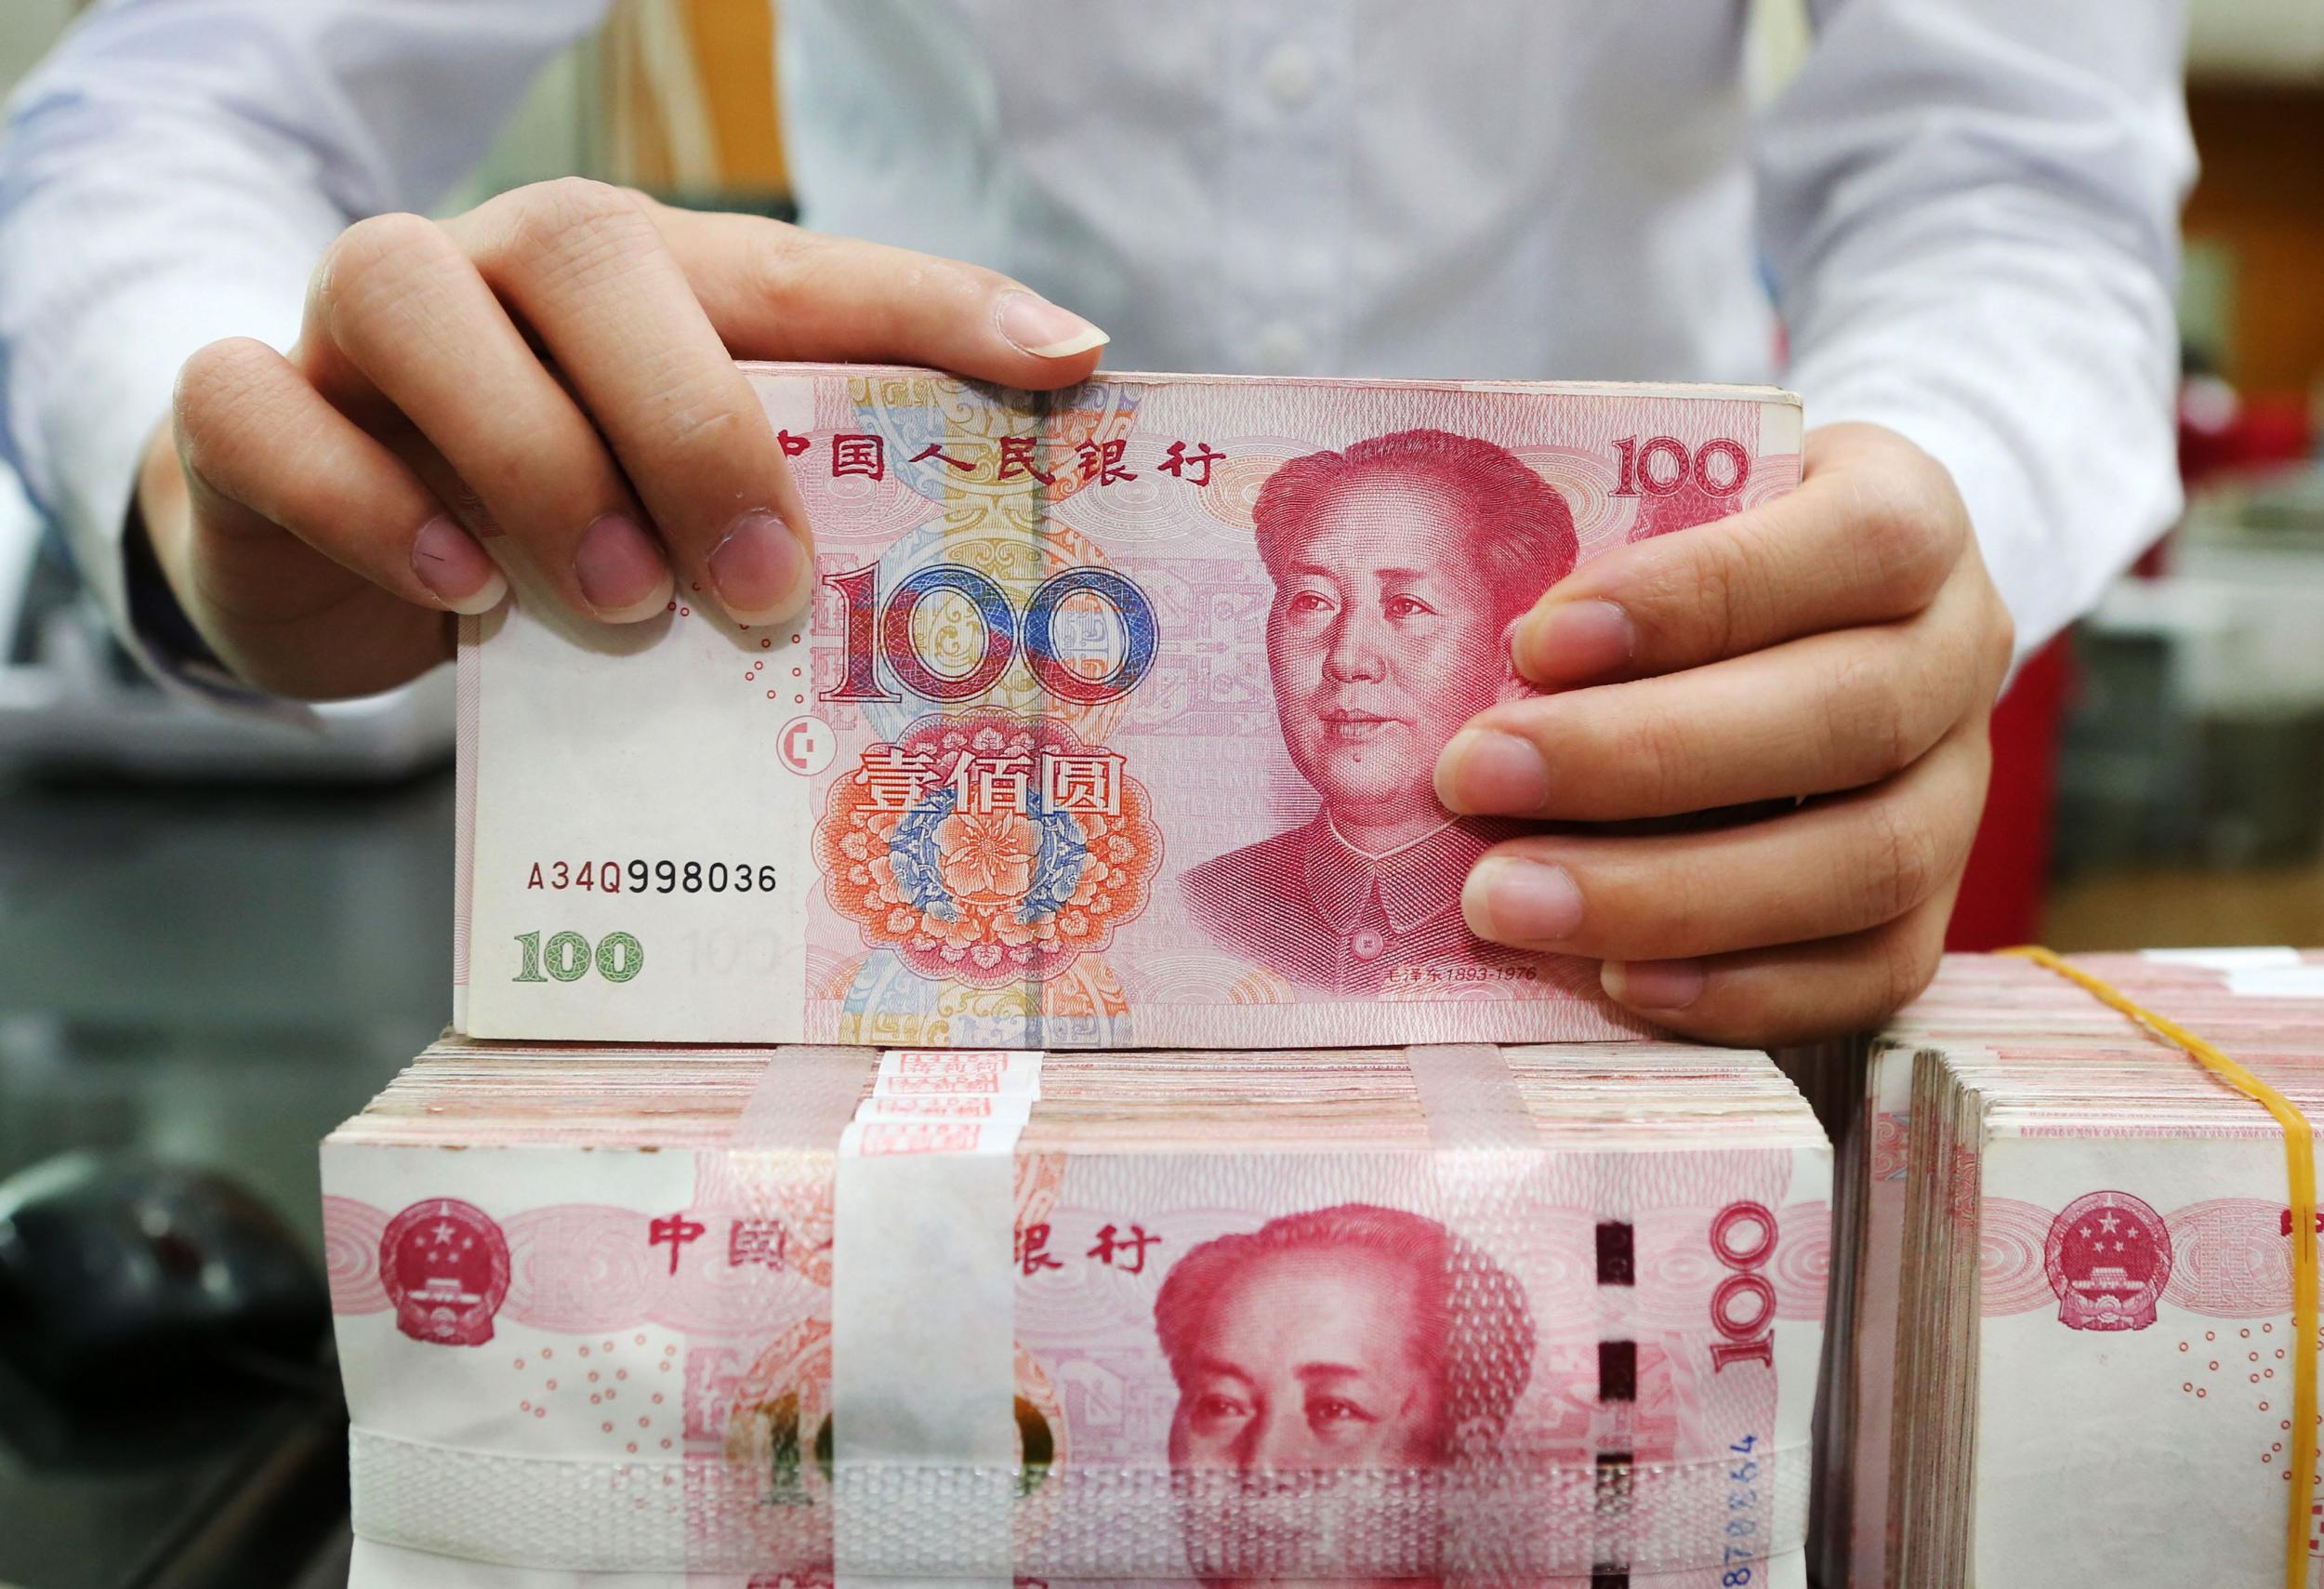 Yuan is being dumped because of investors’ concerns about the trade war